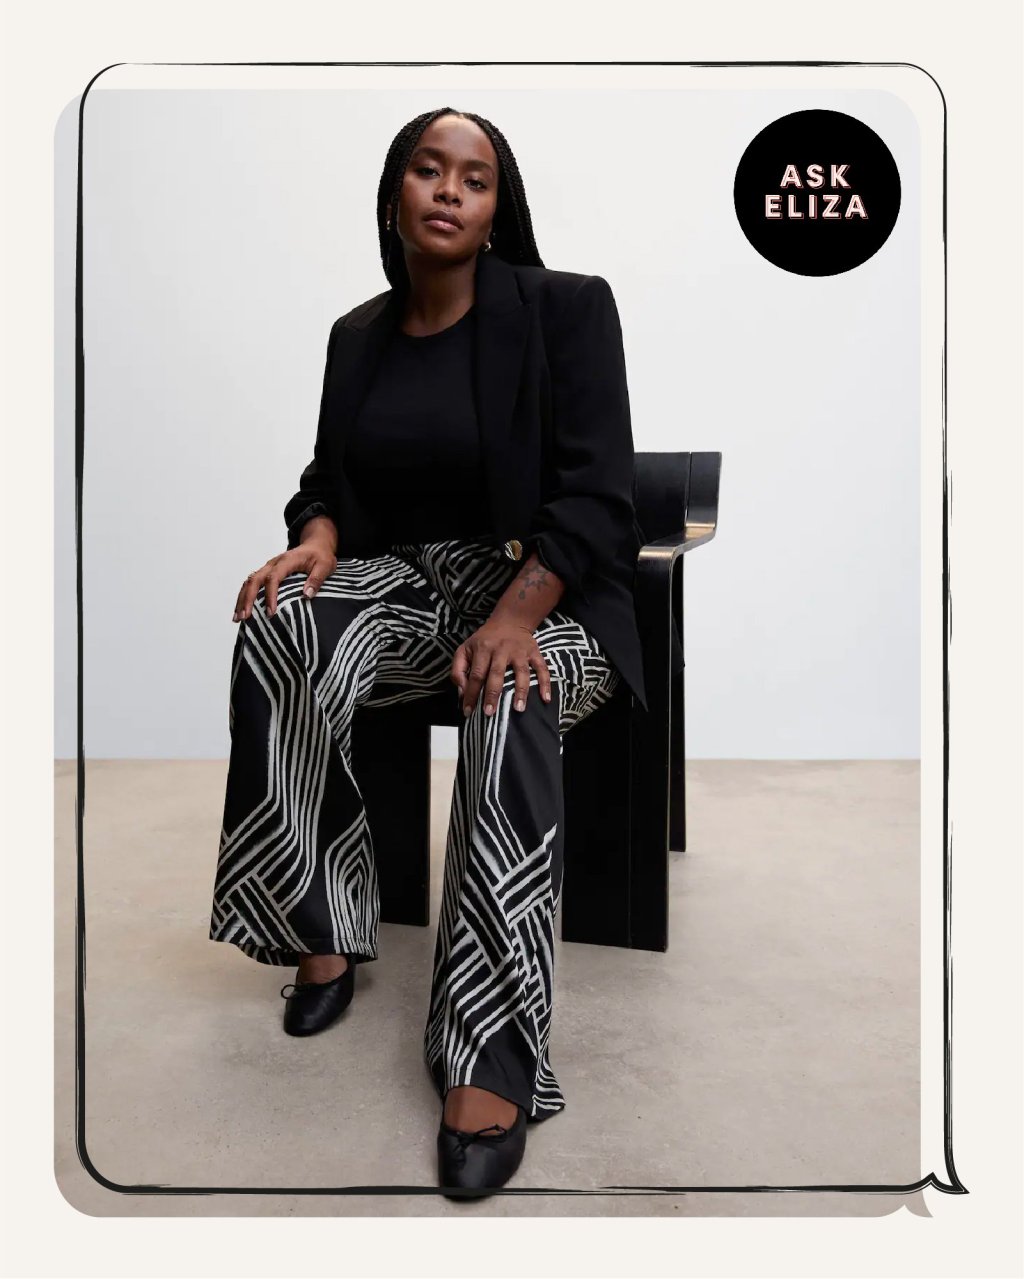 Best work trousers for women 2022: Zara, H&M, The Frankie Shop and